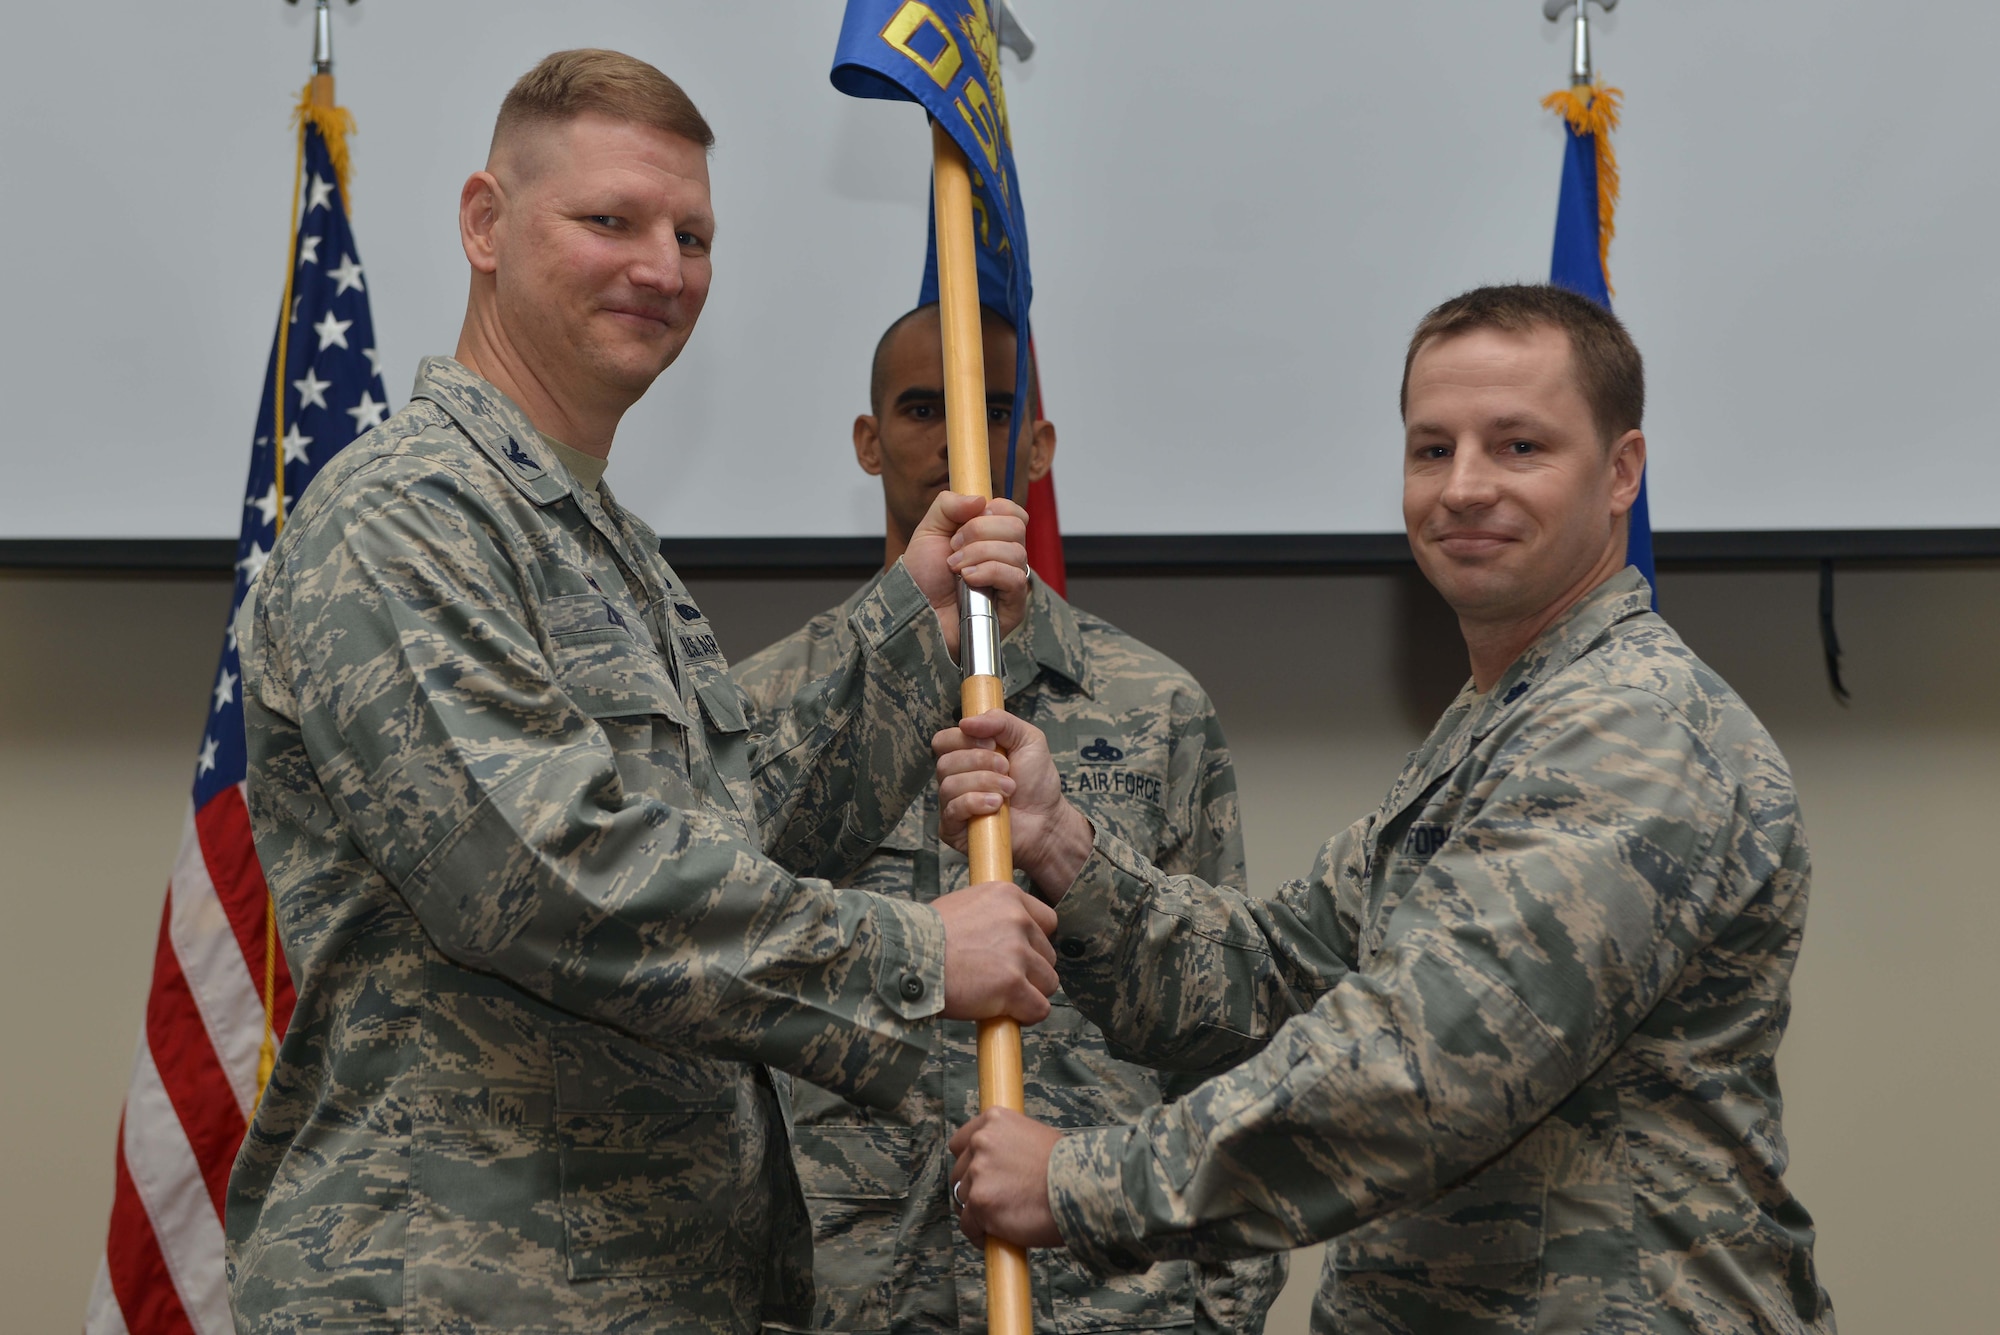 U.S. Air Force Lt. Col. Kyle Wilson, 39th Operations Support Squadron outgoing commander, relinquishes command to U.S. Air Force Col. James Zirkel, 39th Weapons System Security Group commander, during a change of command ceremony June 16, 2016, at Incirlik Air Base, Turkey. Wilson was responsible for providing airfield management, air traffic control, airfield systems and radar maintenance, weapons and tactics, intelligence and weather support to joint and coalition forces in Turkey, NATO and overseas contingency operations. (U.S. Air Force photo by Senior Airman John Nieves Camacho/Released)